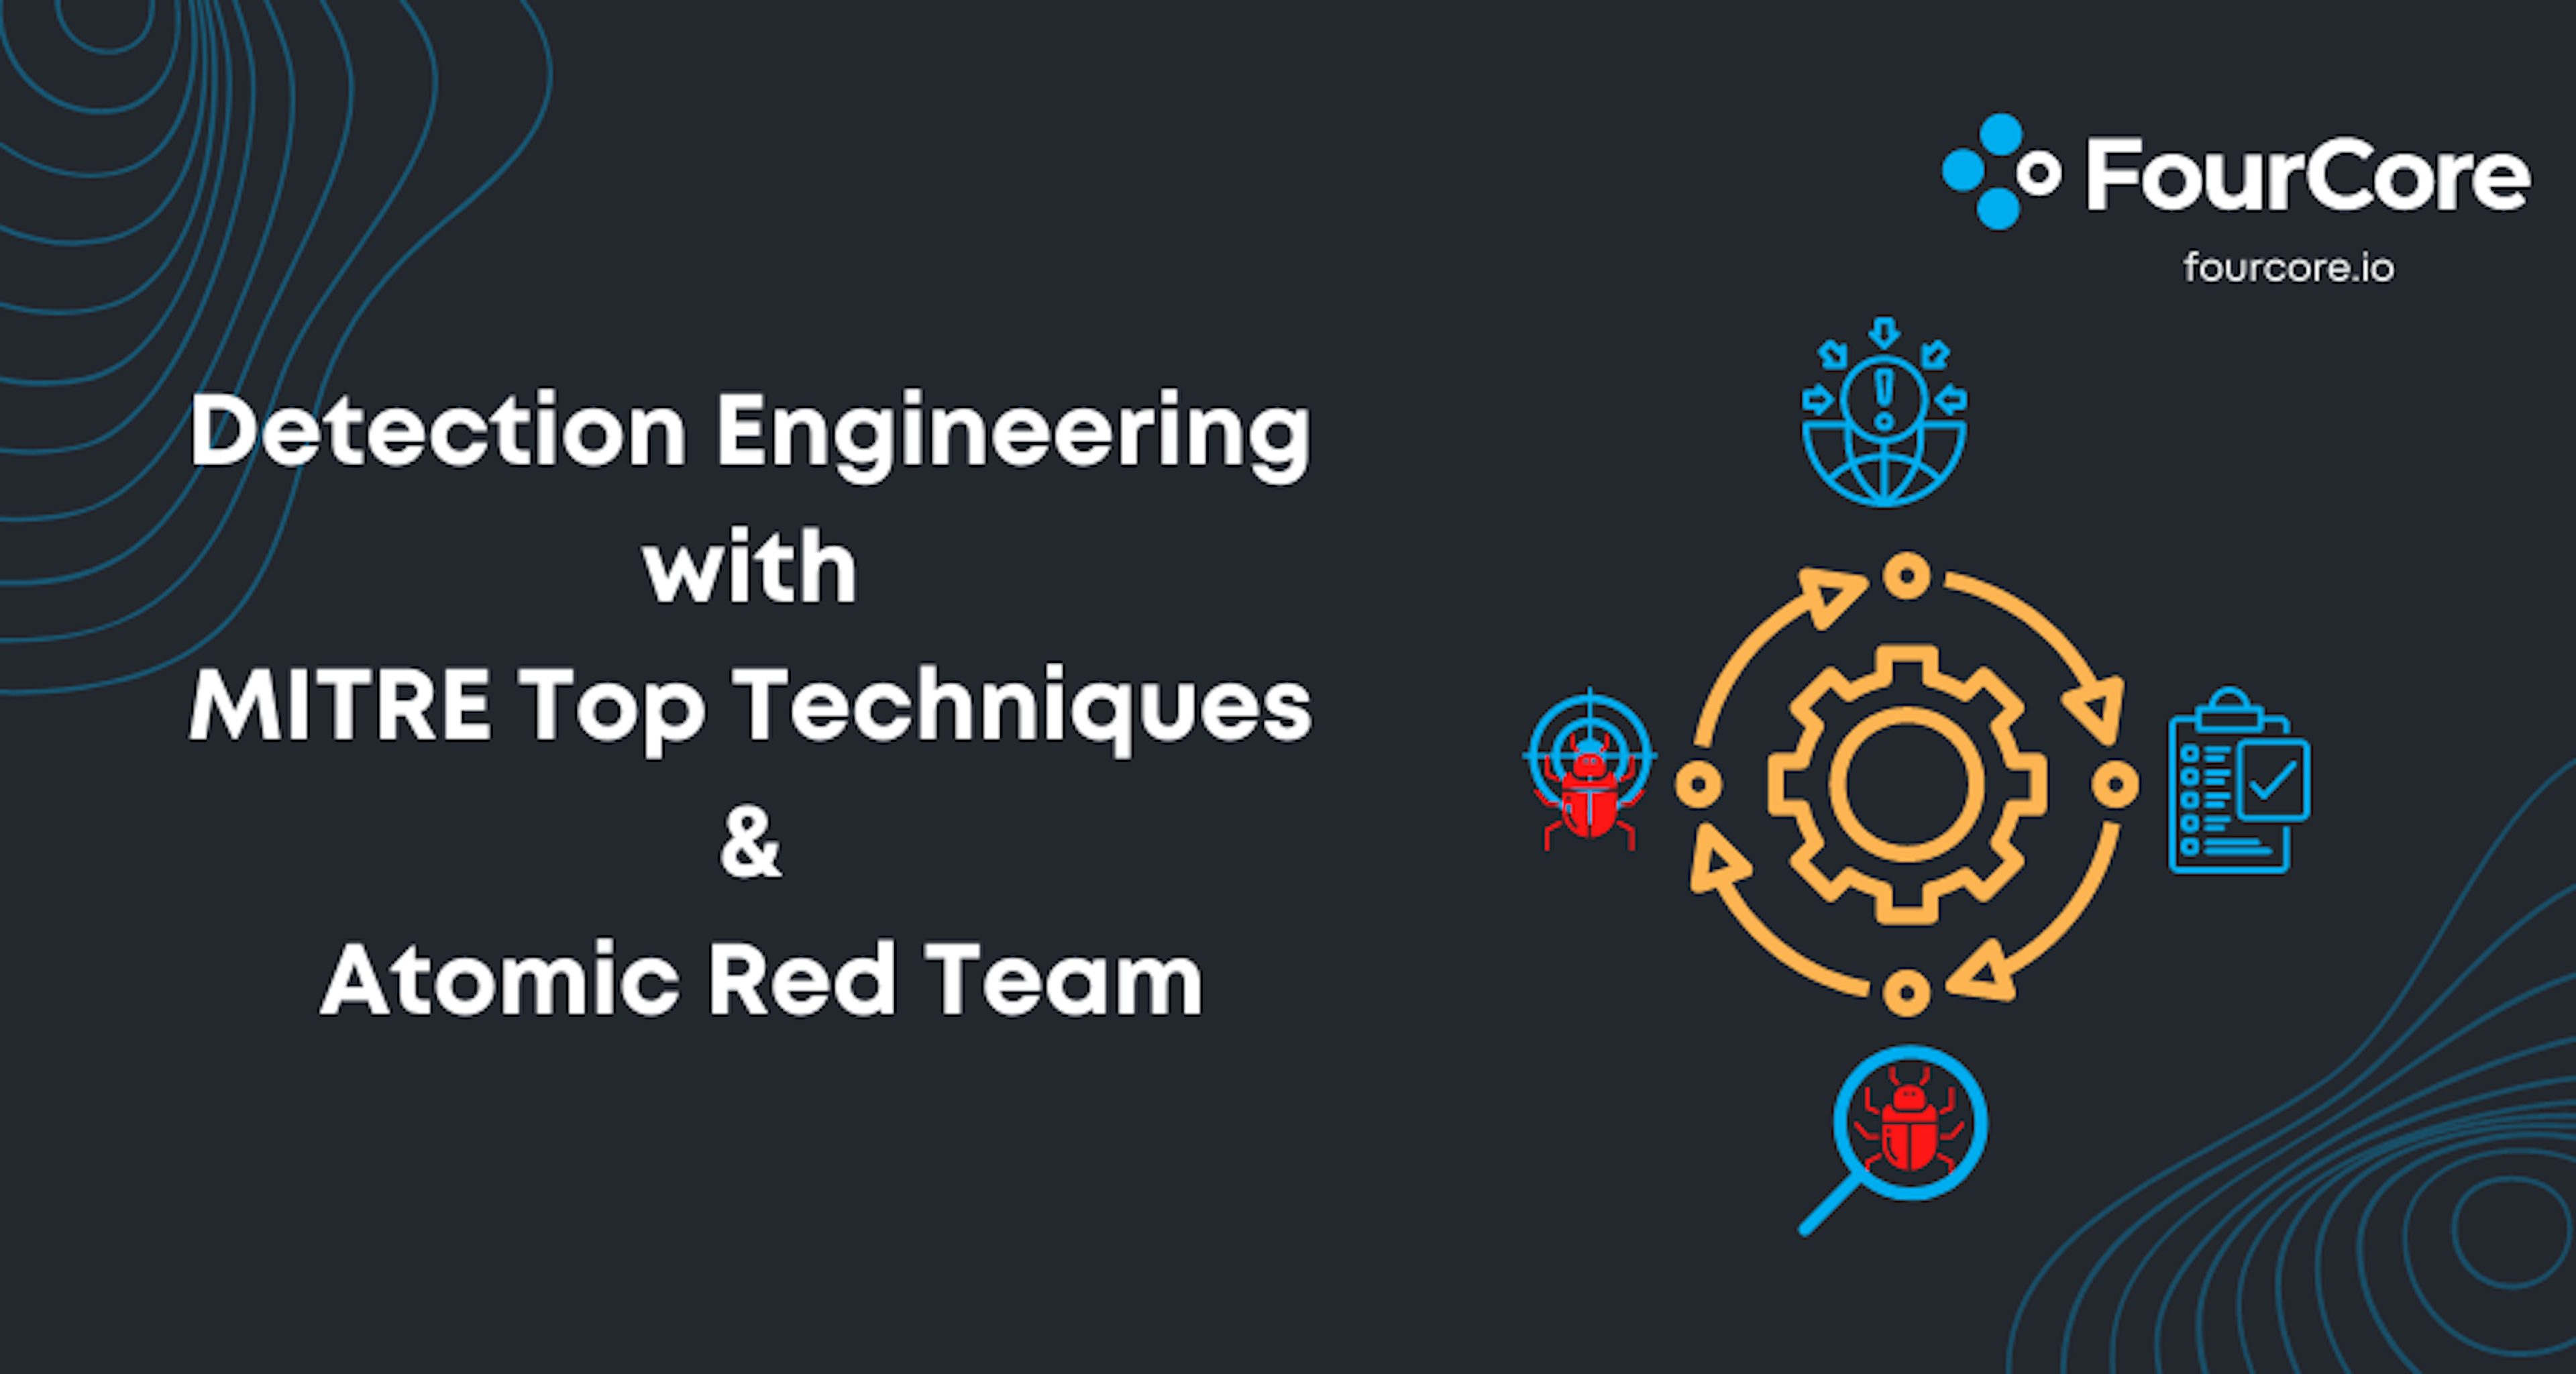 Detection Engineering with MITRE Top Techniques & Atomic Red Team Blog Post Image